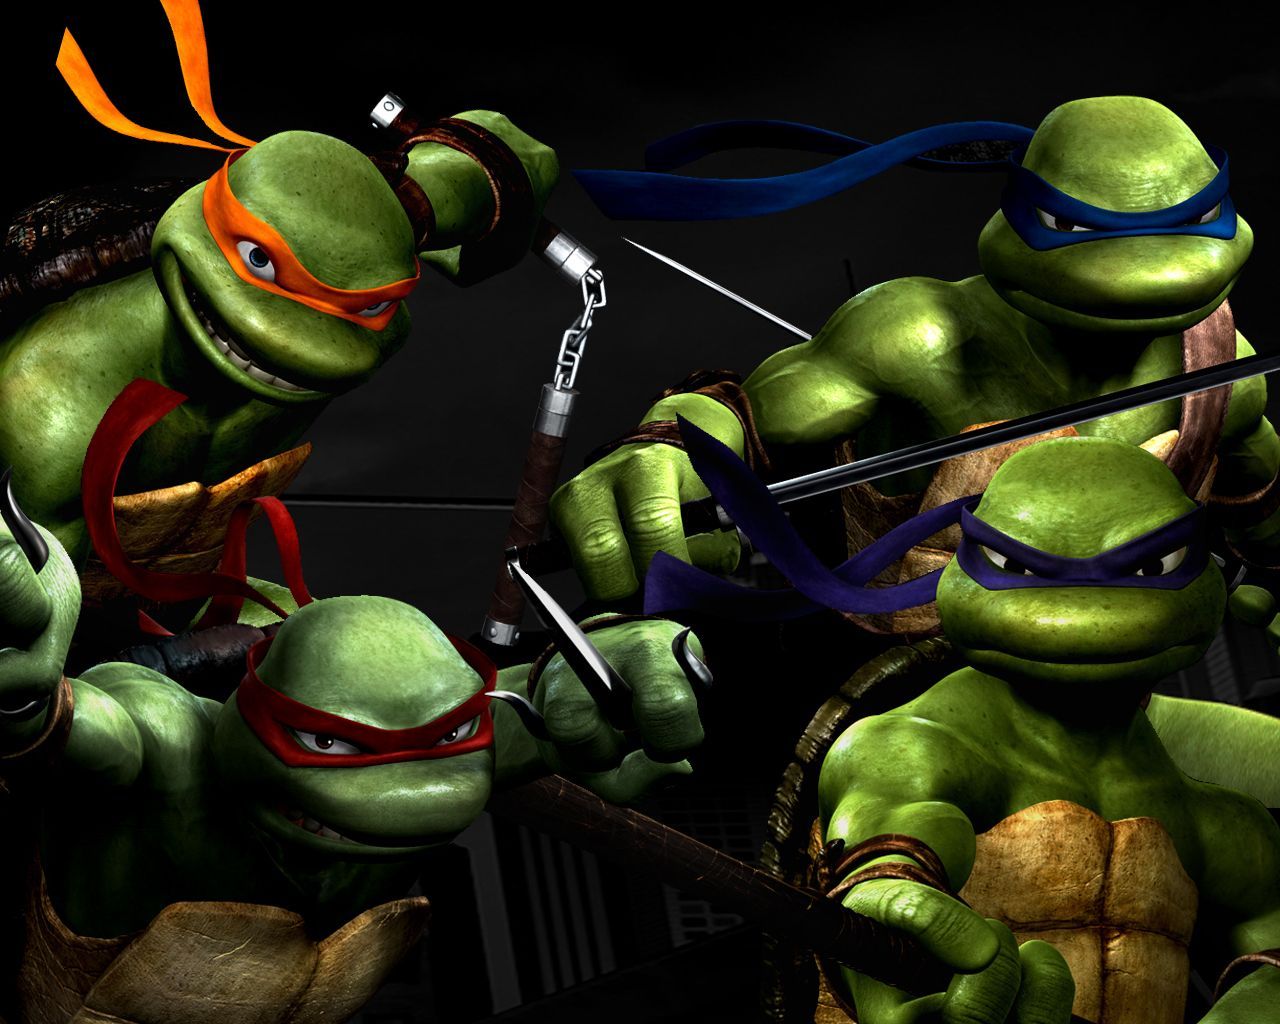 why is the teenage mutant ninja turtle michaelangelo spelled differently from the artist michelangelo